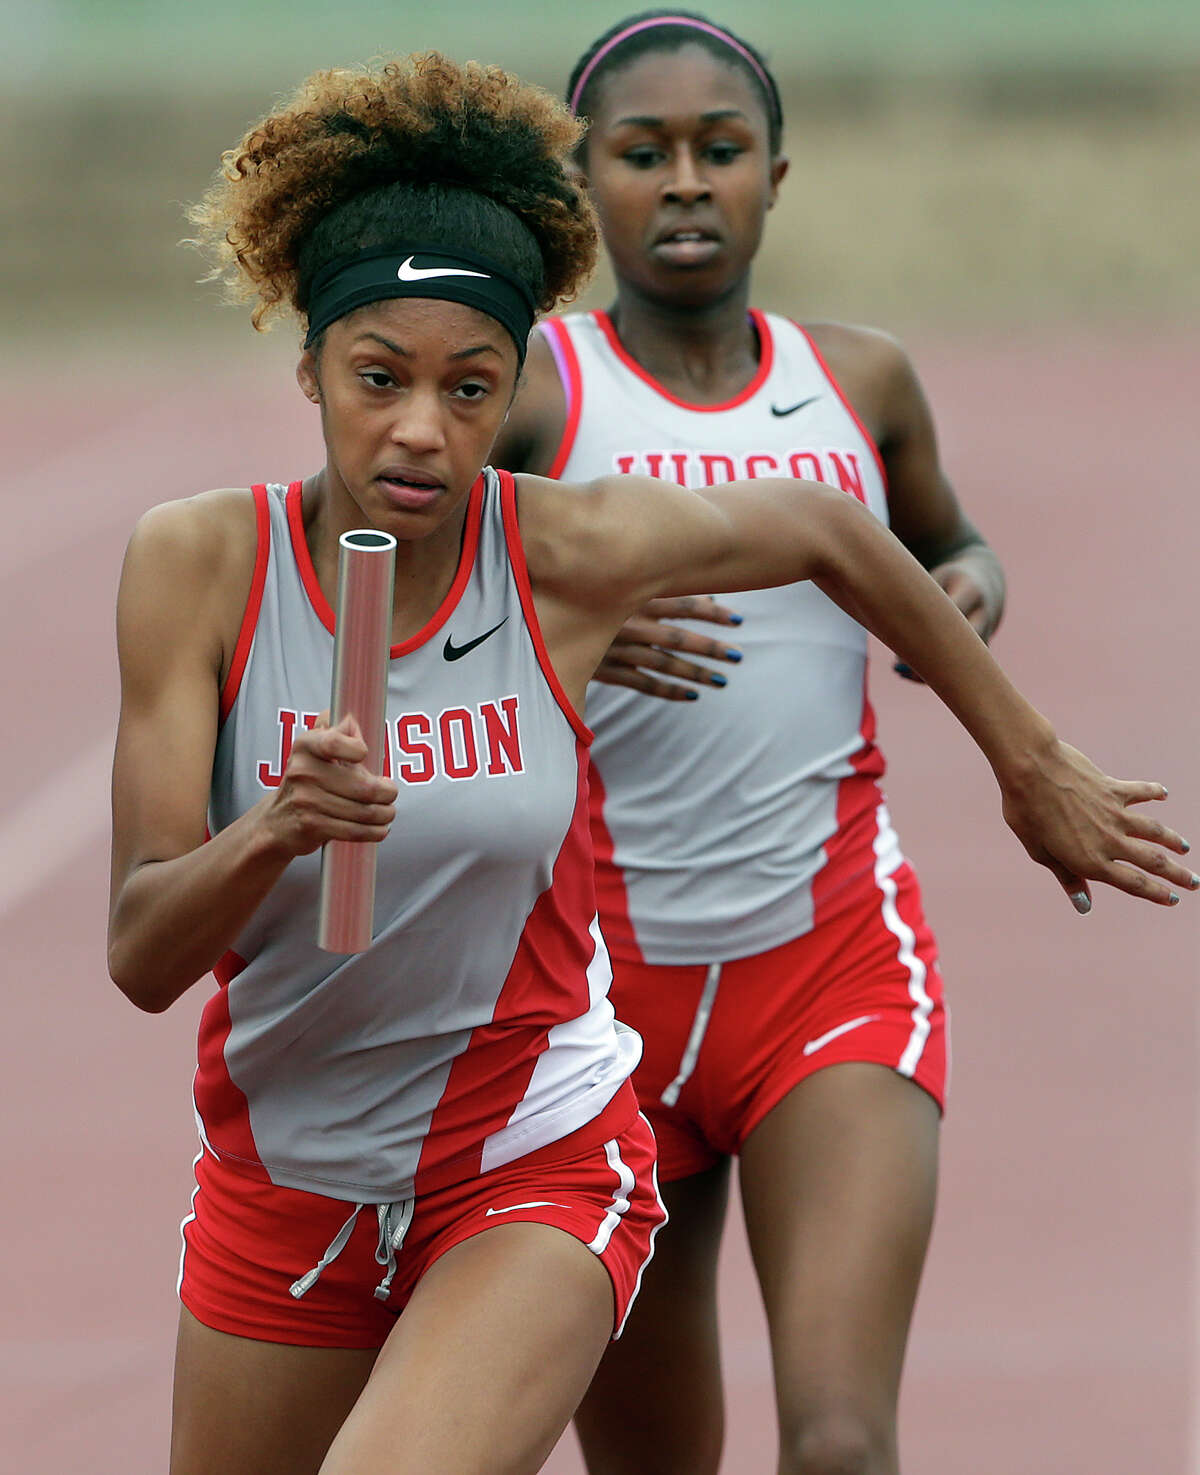 Judson’s Mariah Kuykendoll takes the baton from Zantori Dickerson in the 1,600-meter relay as districts 25/26-6A and 27/28-6A hold area track meets at Gustafson Stadium on April 24, 2015.